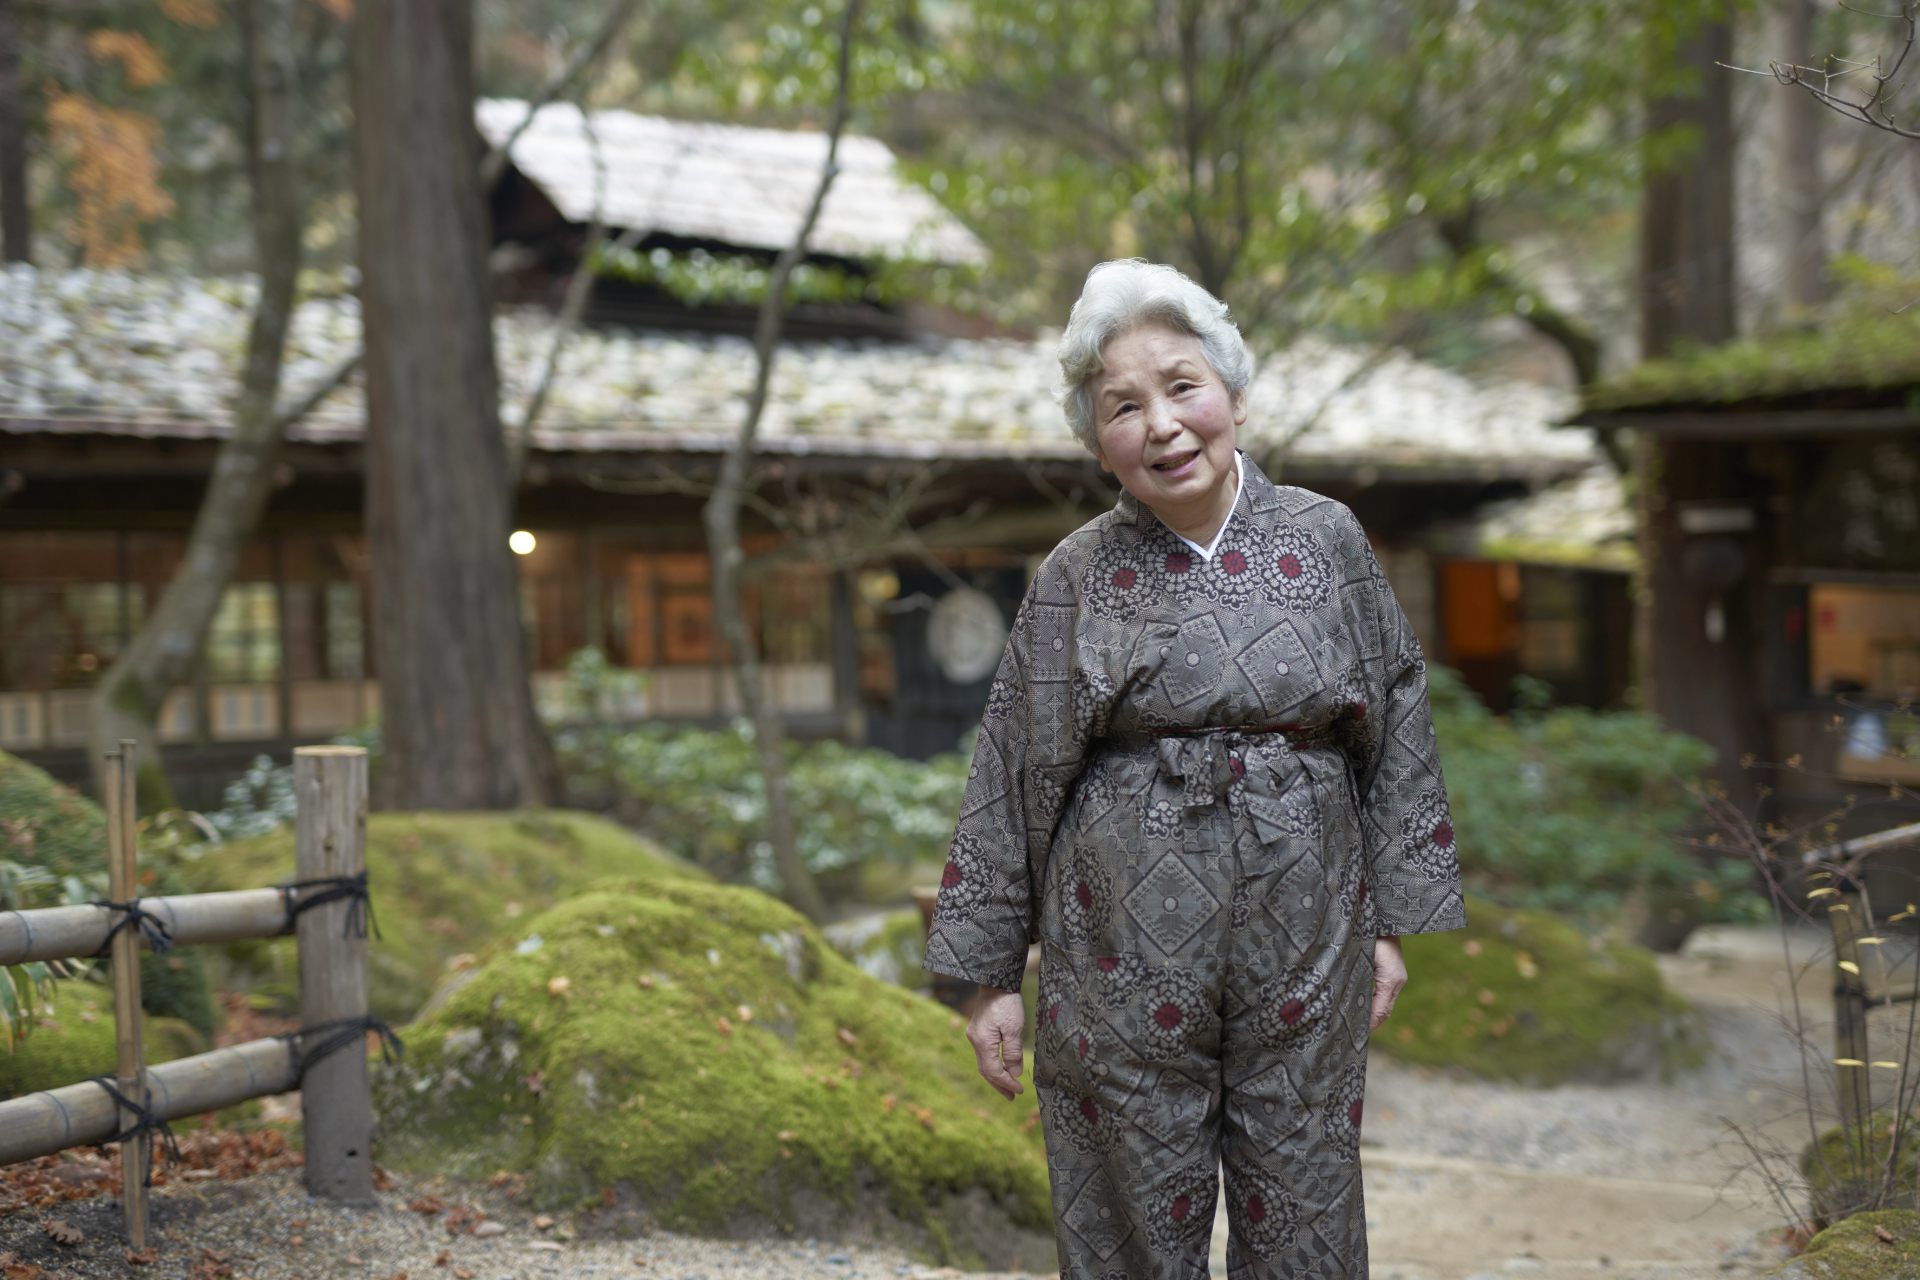 The proprietress, Setsuko Teratani, has many fans who love her personality and her stories.